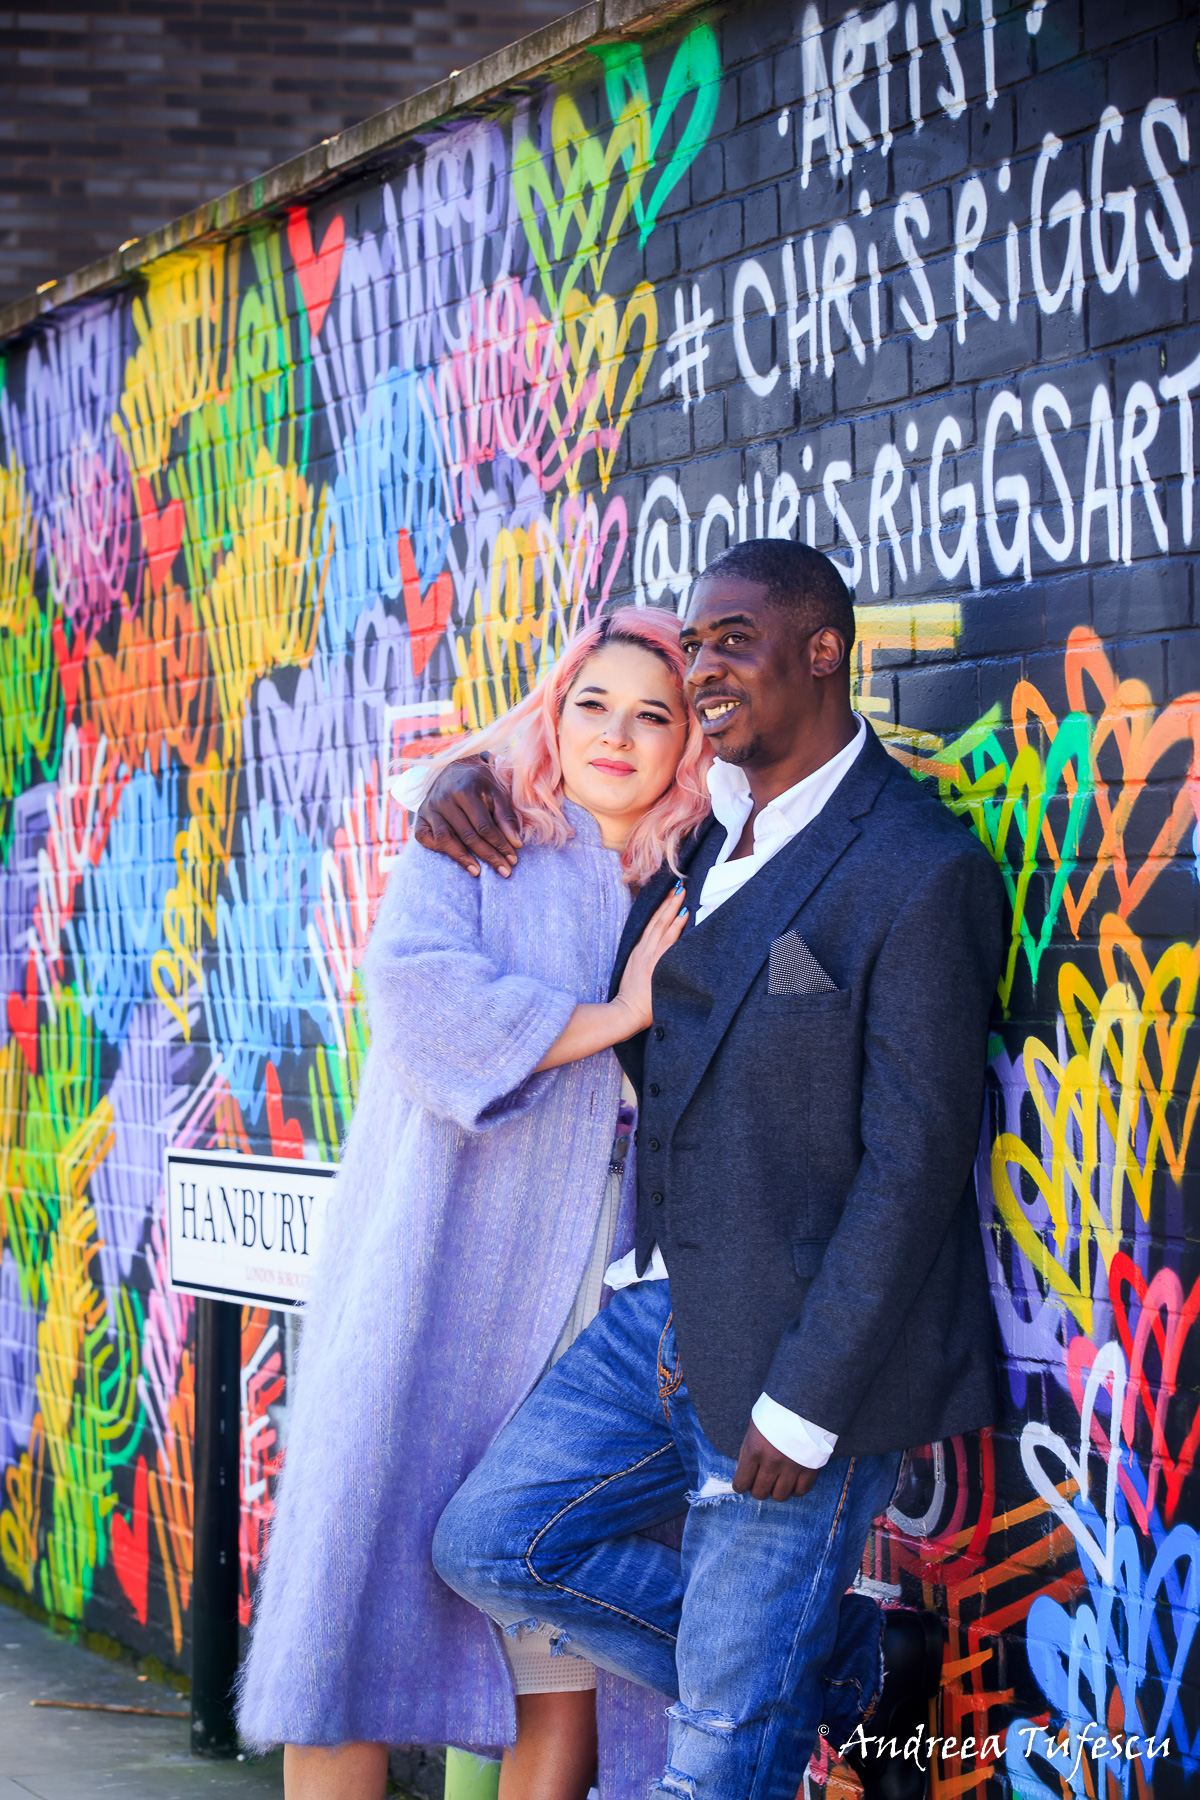  Wedding and Engagement Photography by Andreea Tufescu - A & B Couple Session - Couple Photoshoot East London Shoreditch 